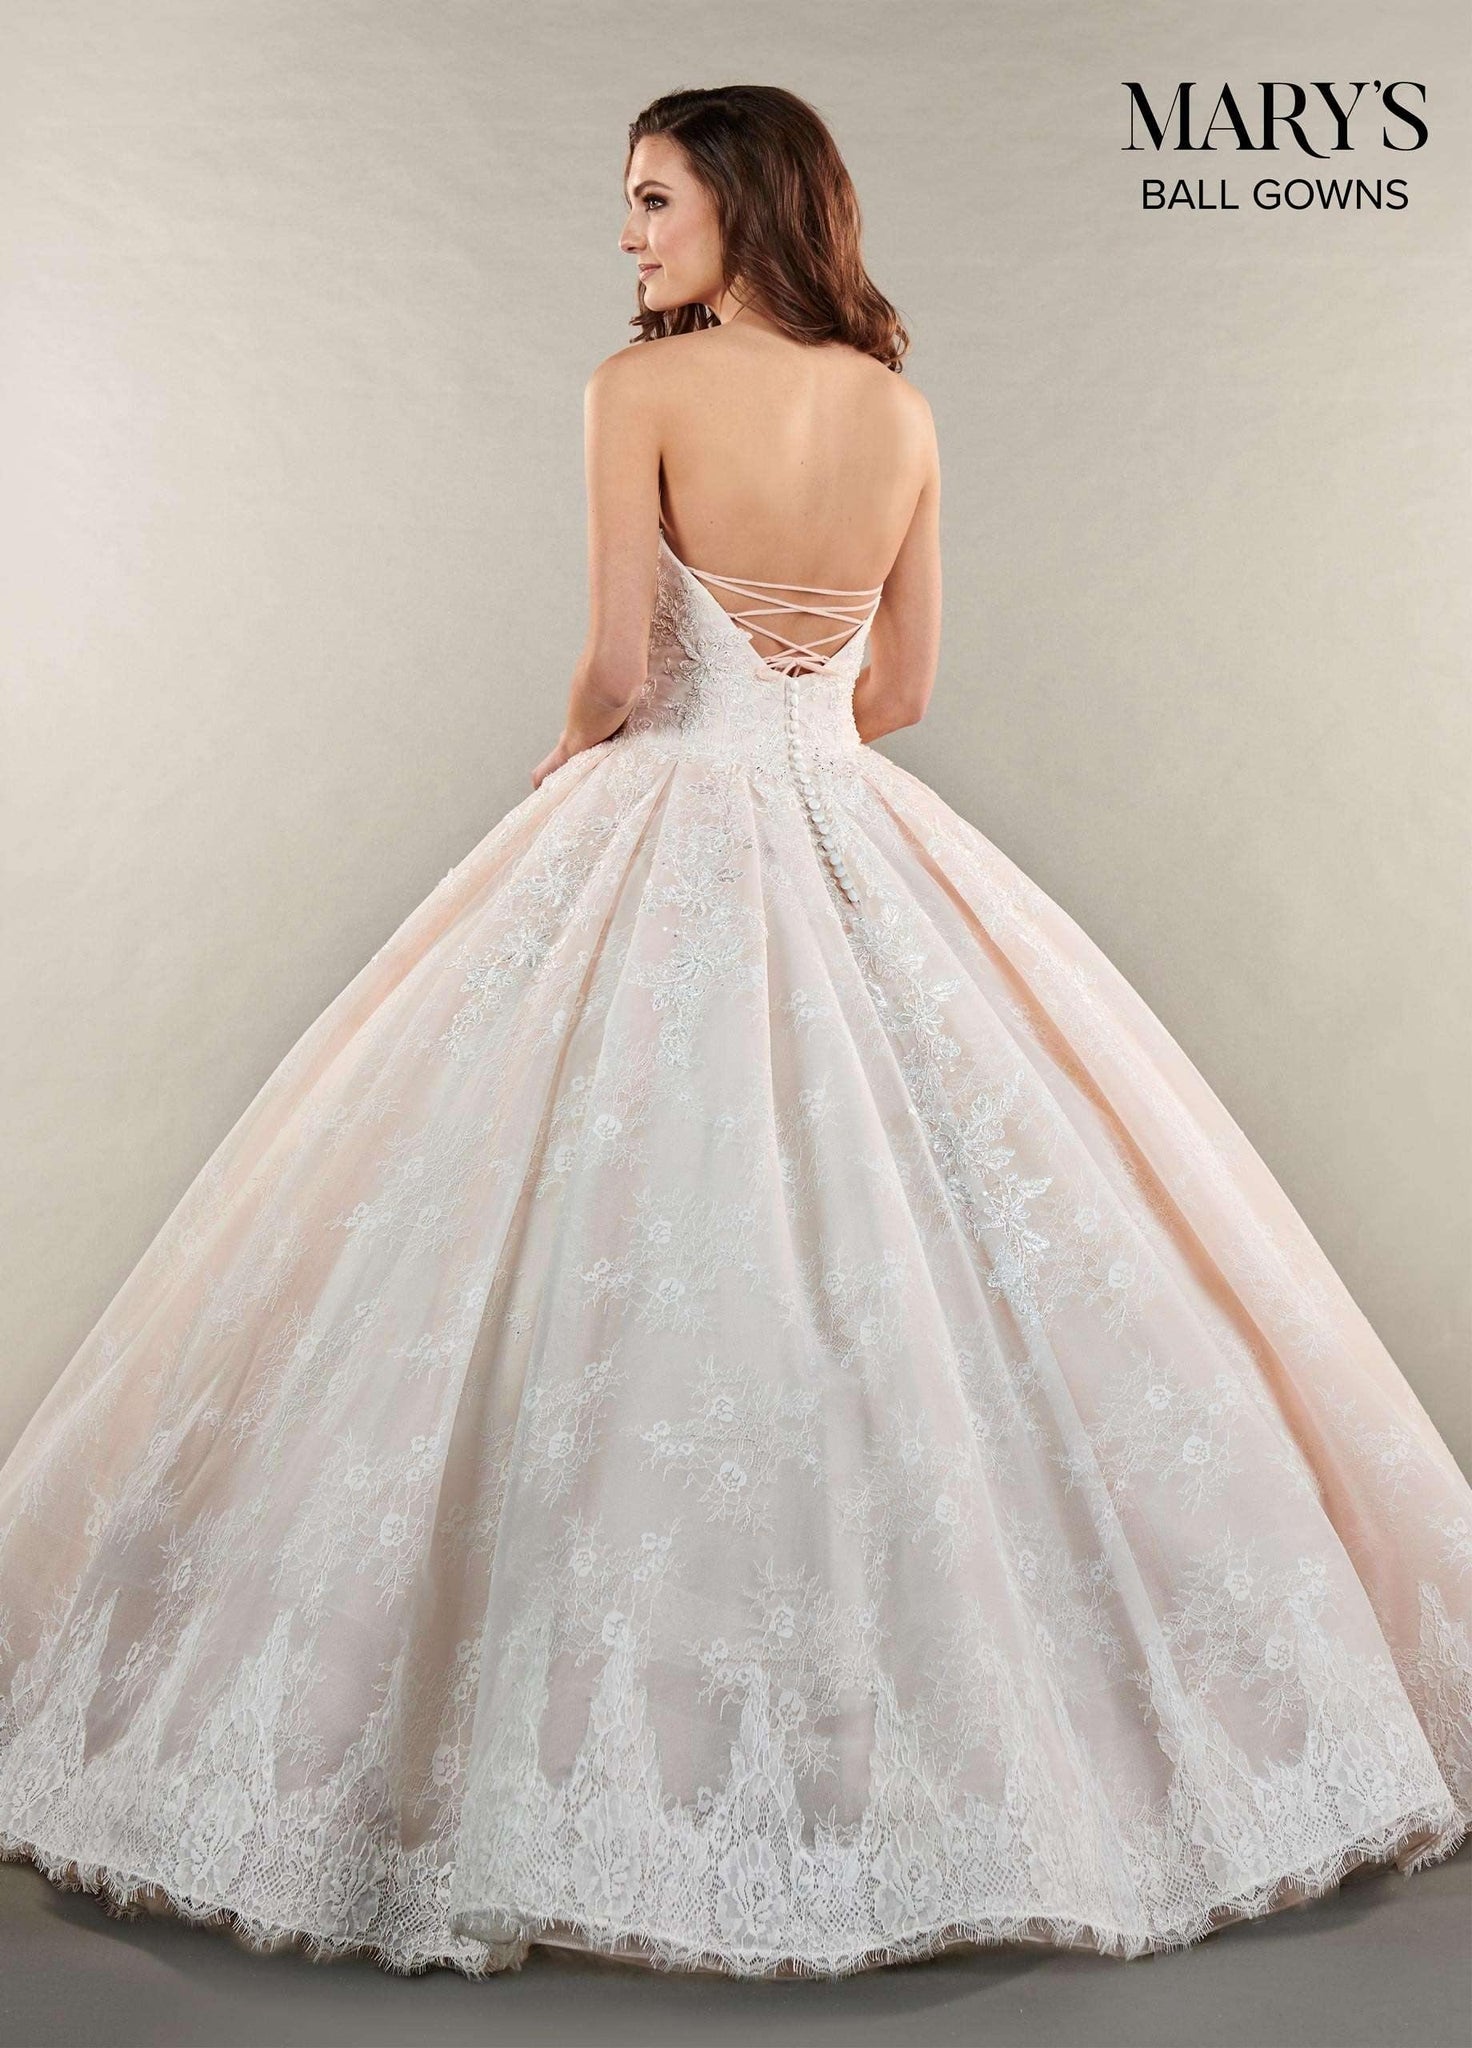 MARY'S BRIDAL - Abby - Adore Bridal and Occasion Wear